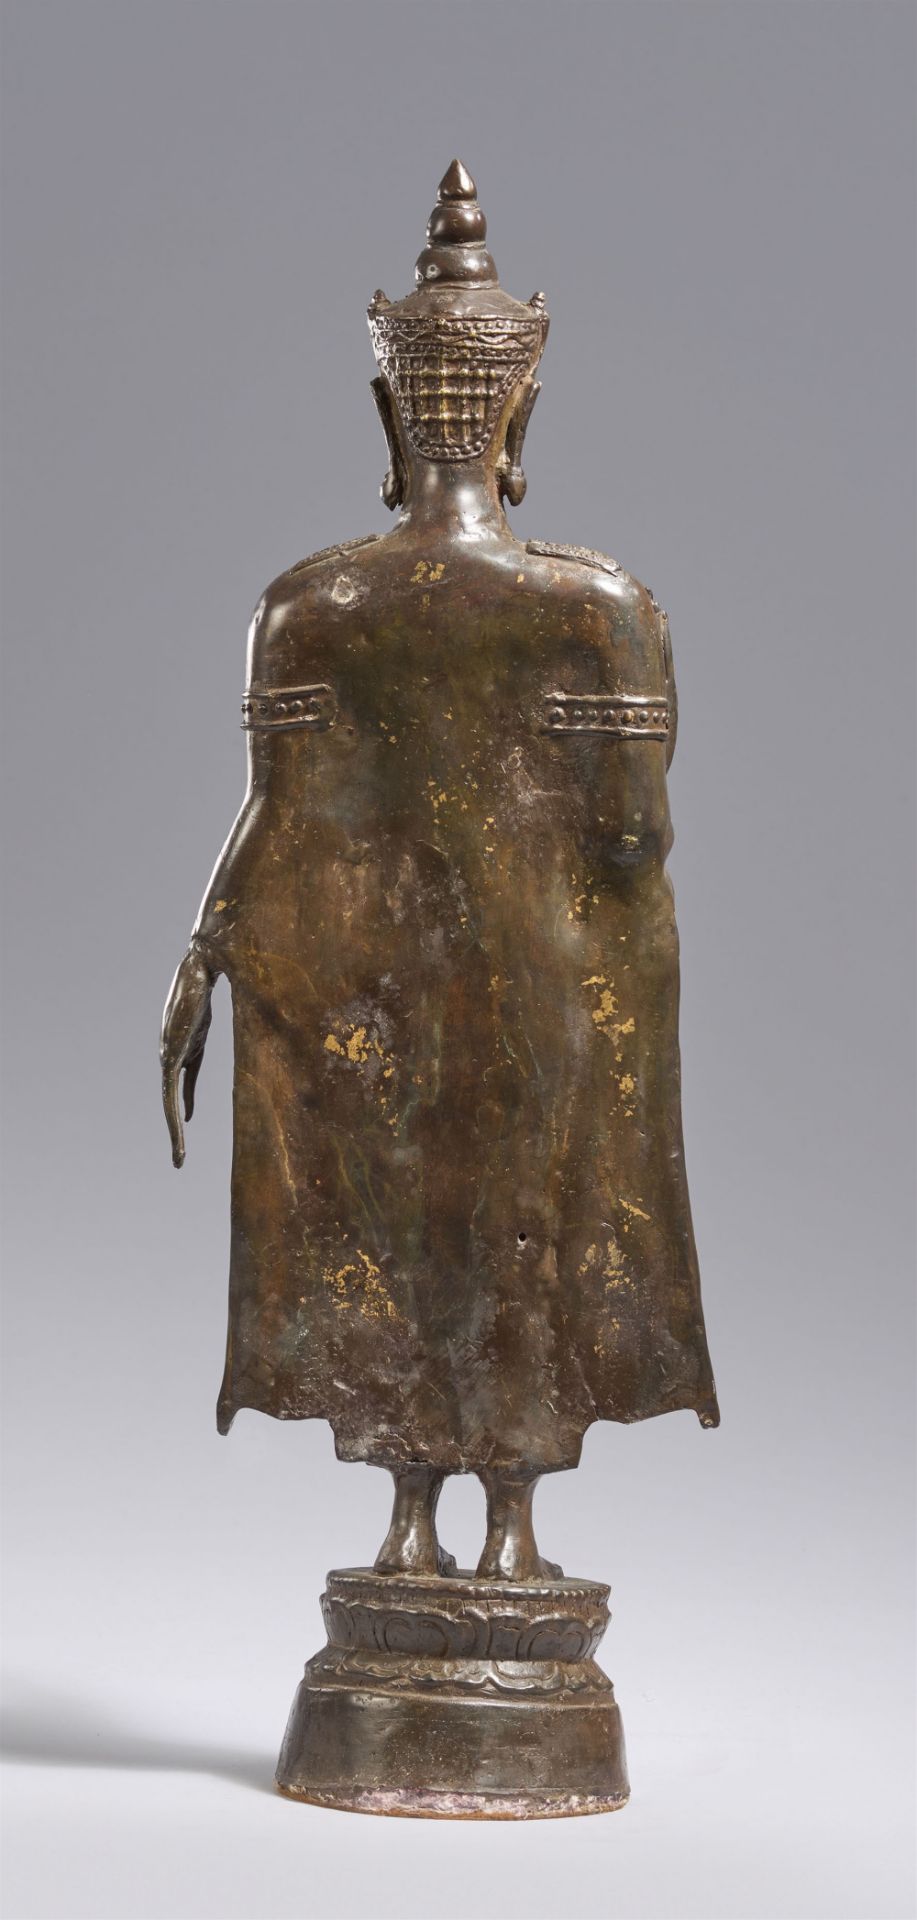 An Ayutthaya-style bronze figure of a crowned and bejewelled Buddha. Thailand. 17th century or later - Image 2 of 2